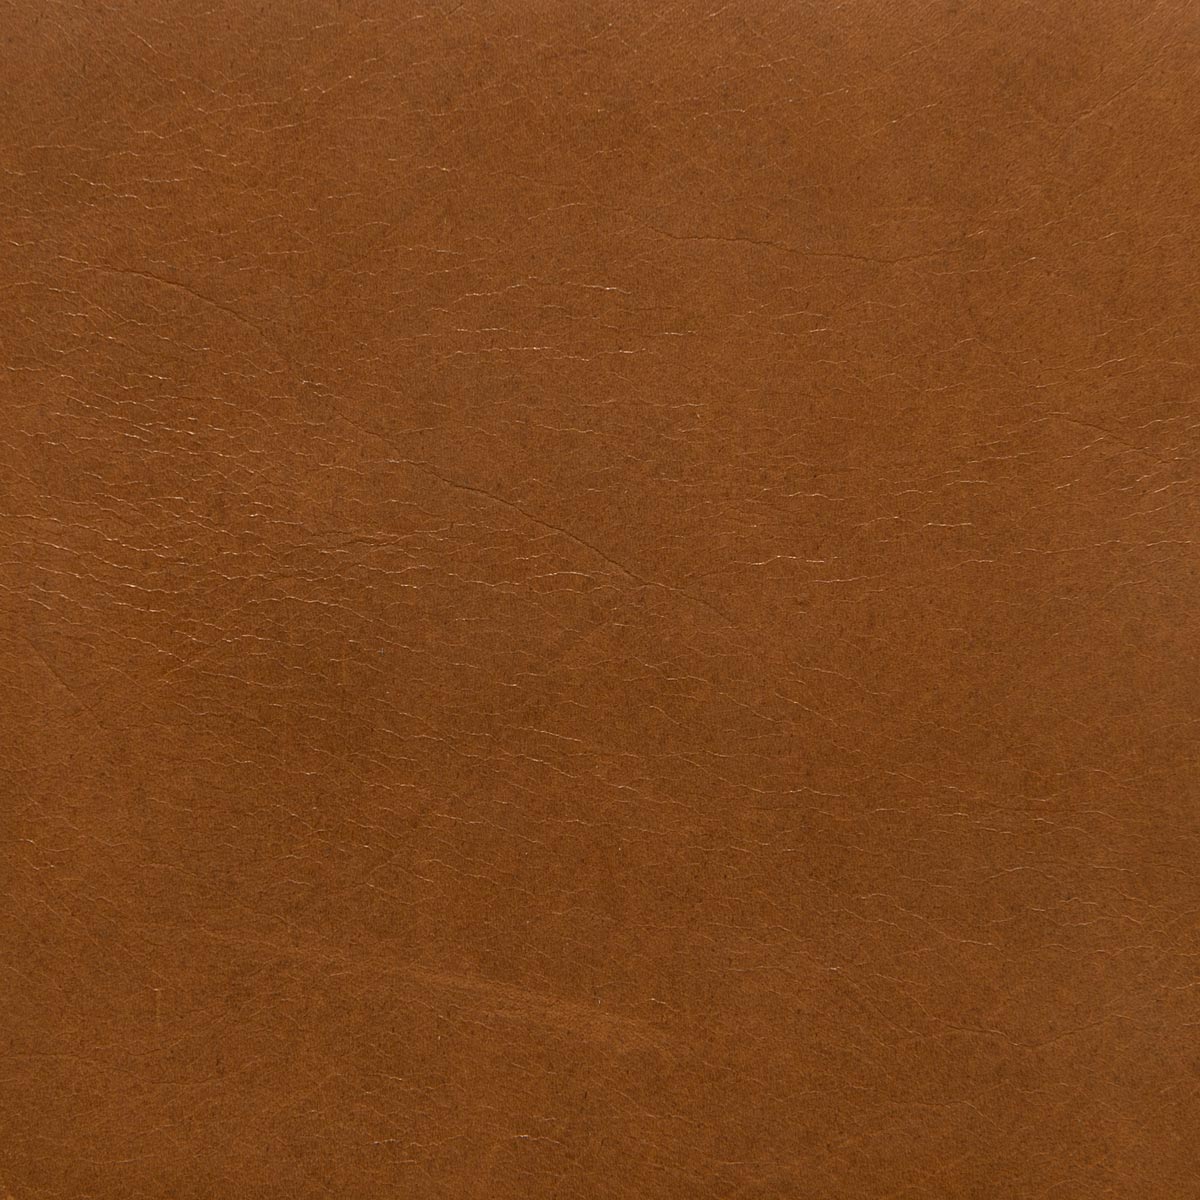 Dark brown leather padded leather or vinyl upholstery texture that tiles  seamlessly as a pattern, Stock image